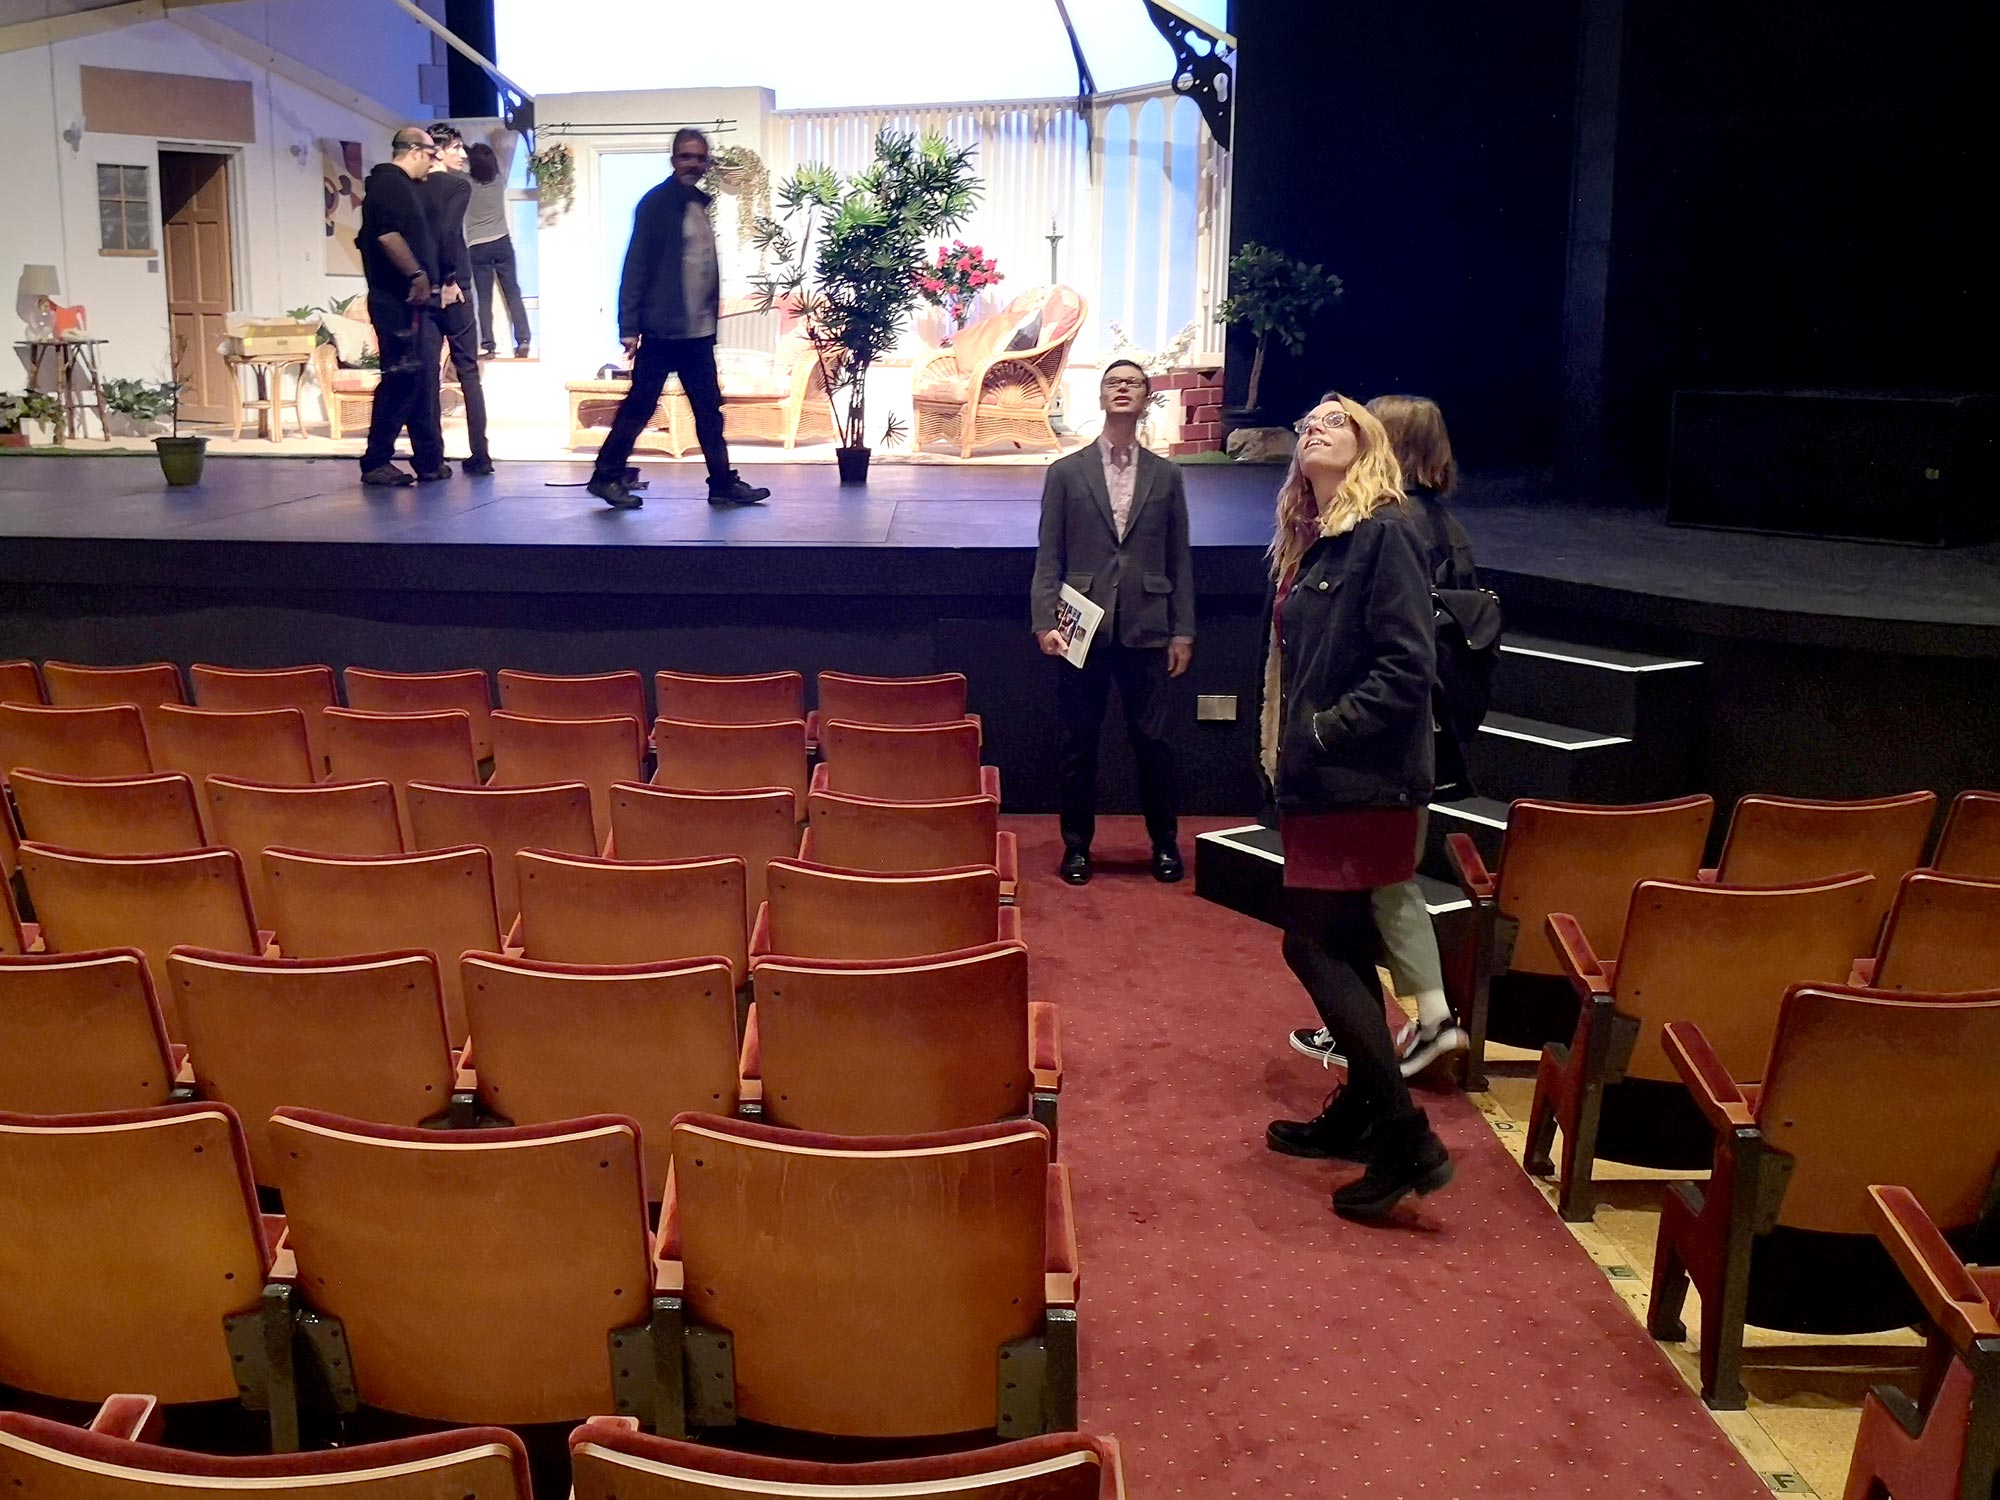 Jen and Anna on a tour with Communications Manager Ray Clenshaw, in the impeccably restored main theatre space.